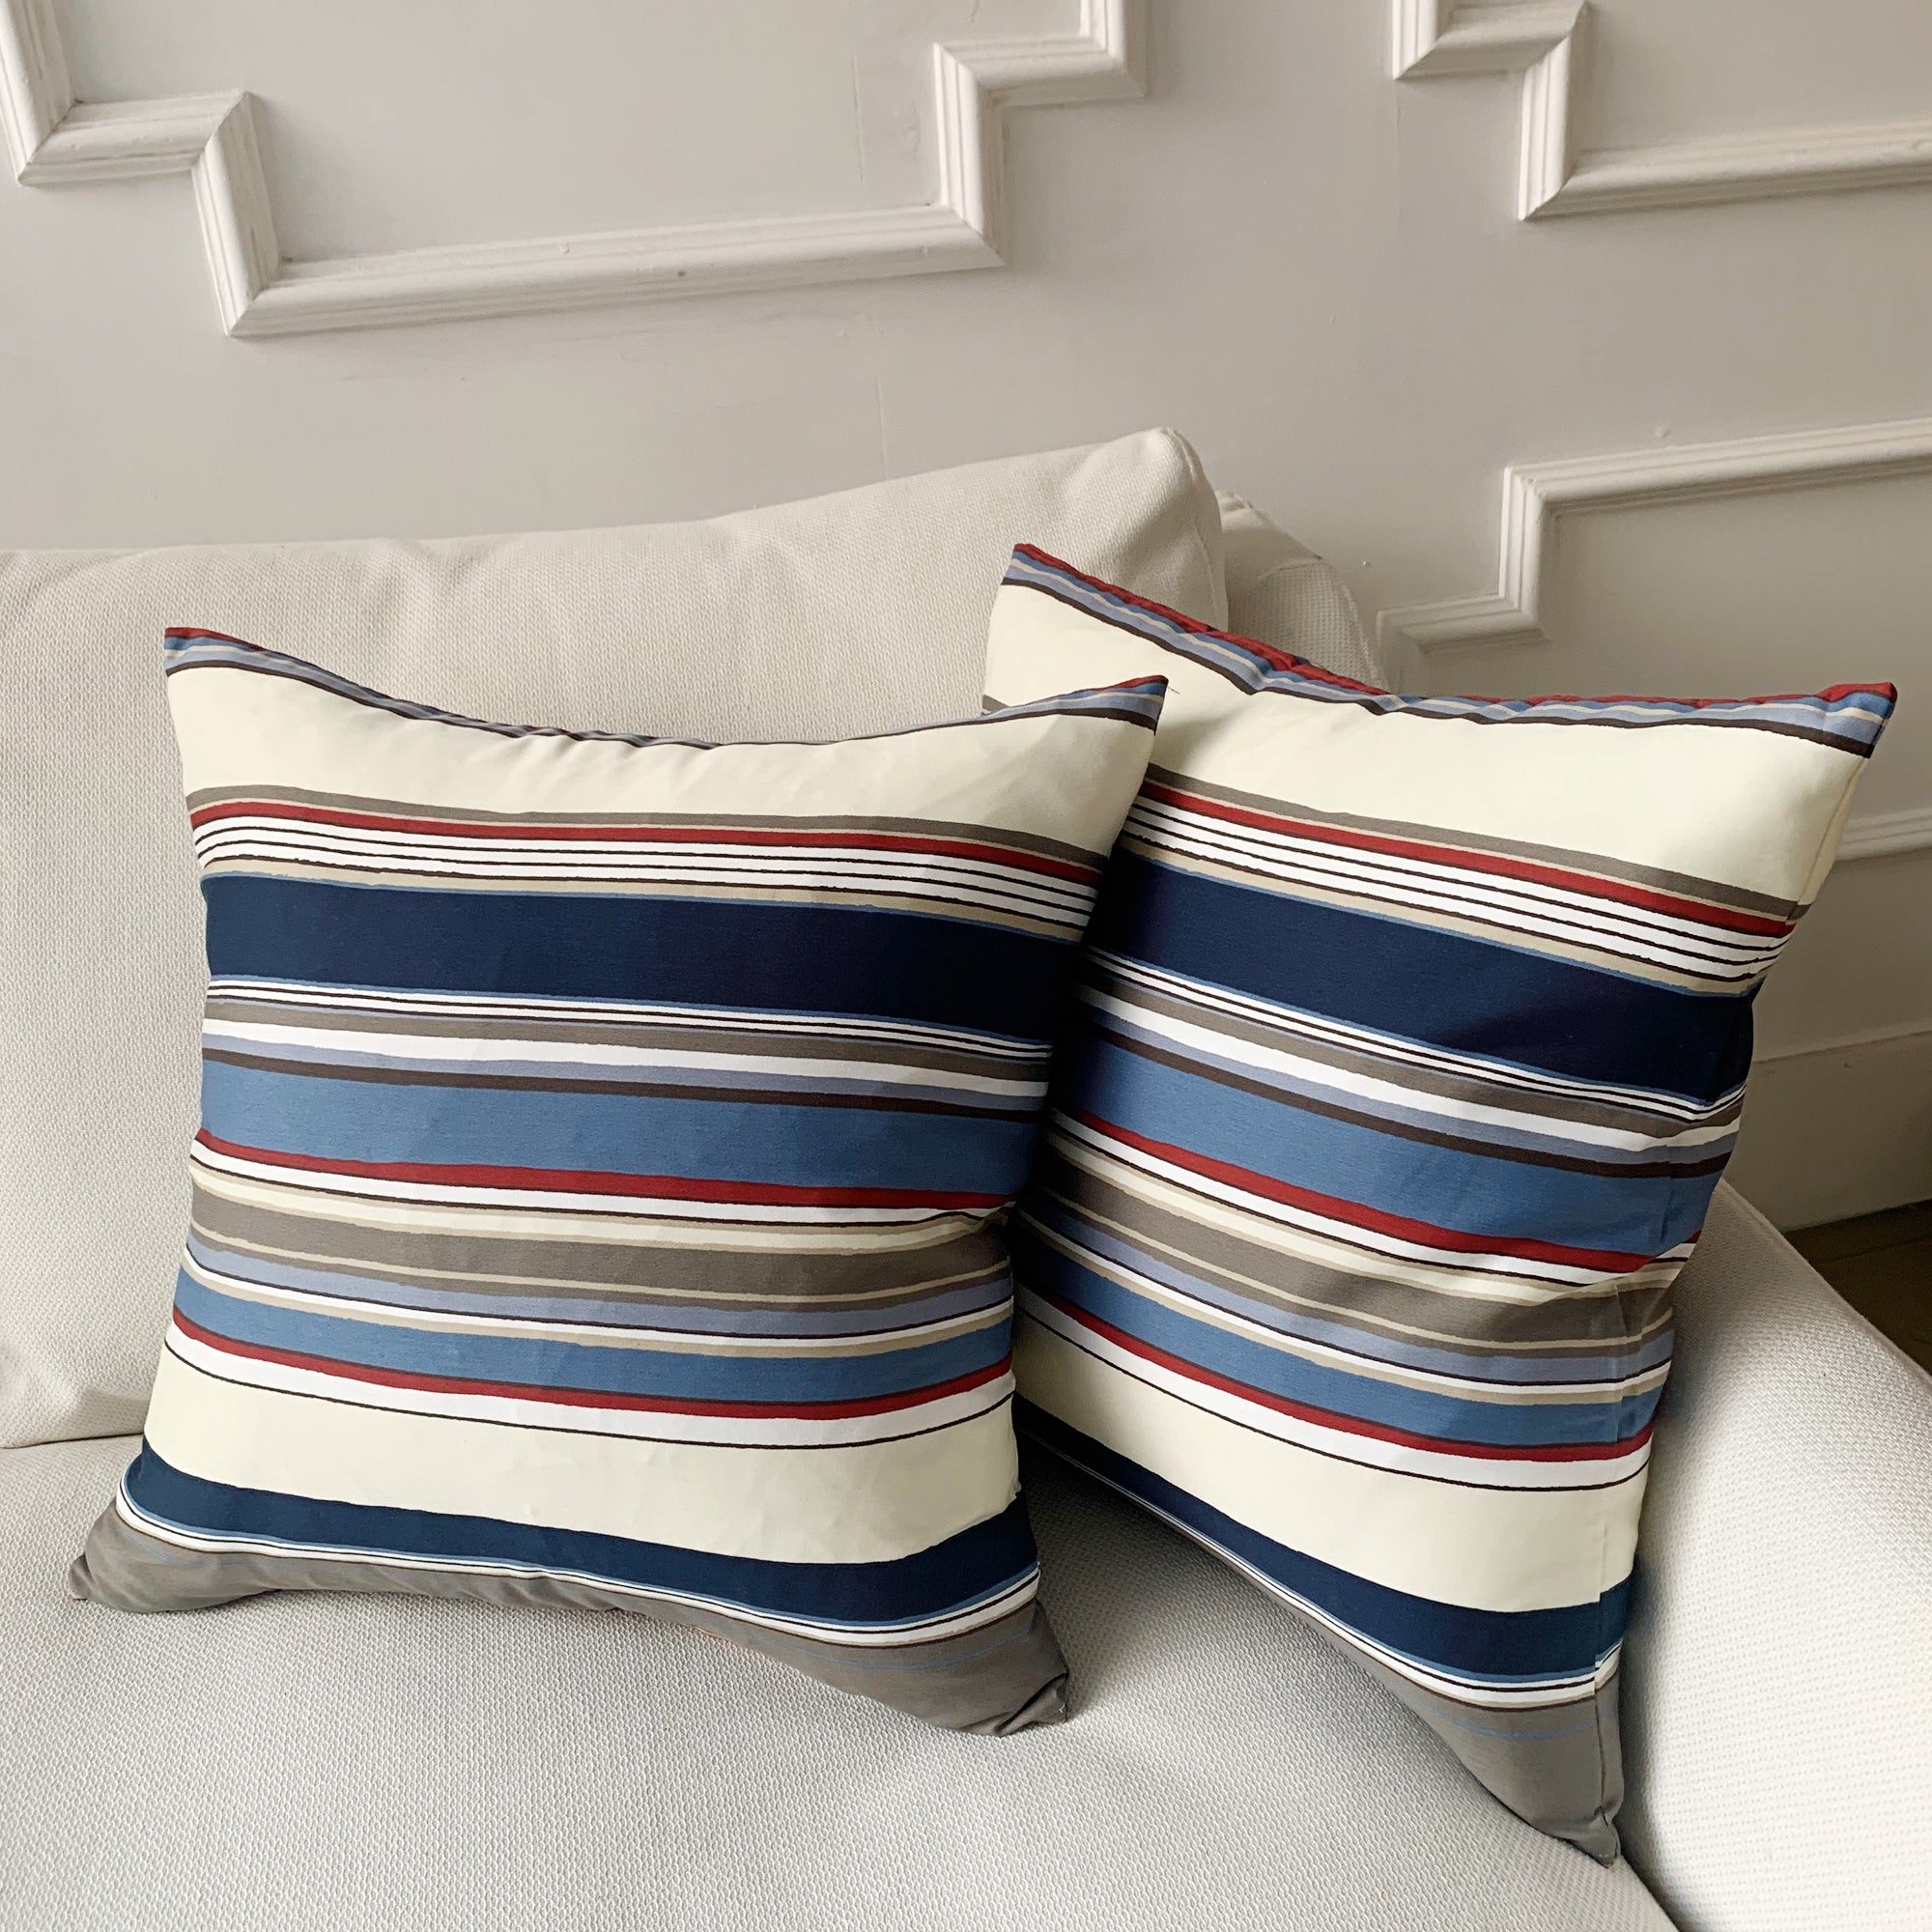 READY TO SHIP 20X20 Clay McLaurin Mediterranean Stripe Pillow Cover in –  Linen + Cloth